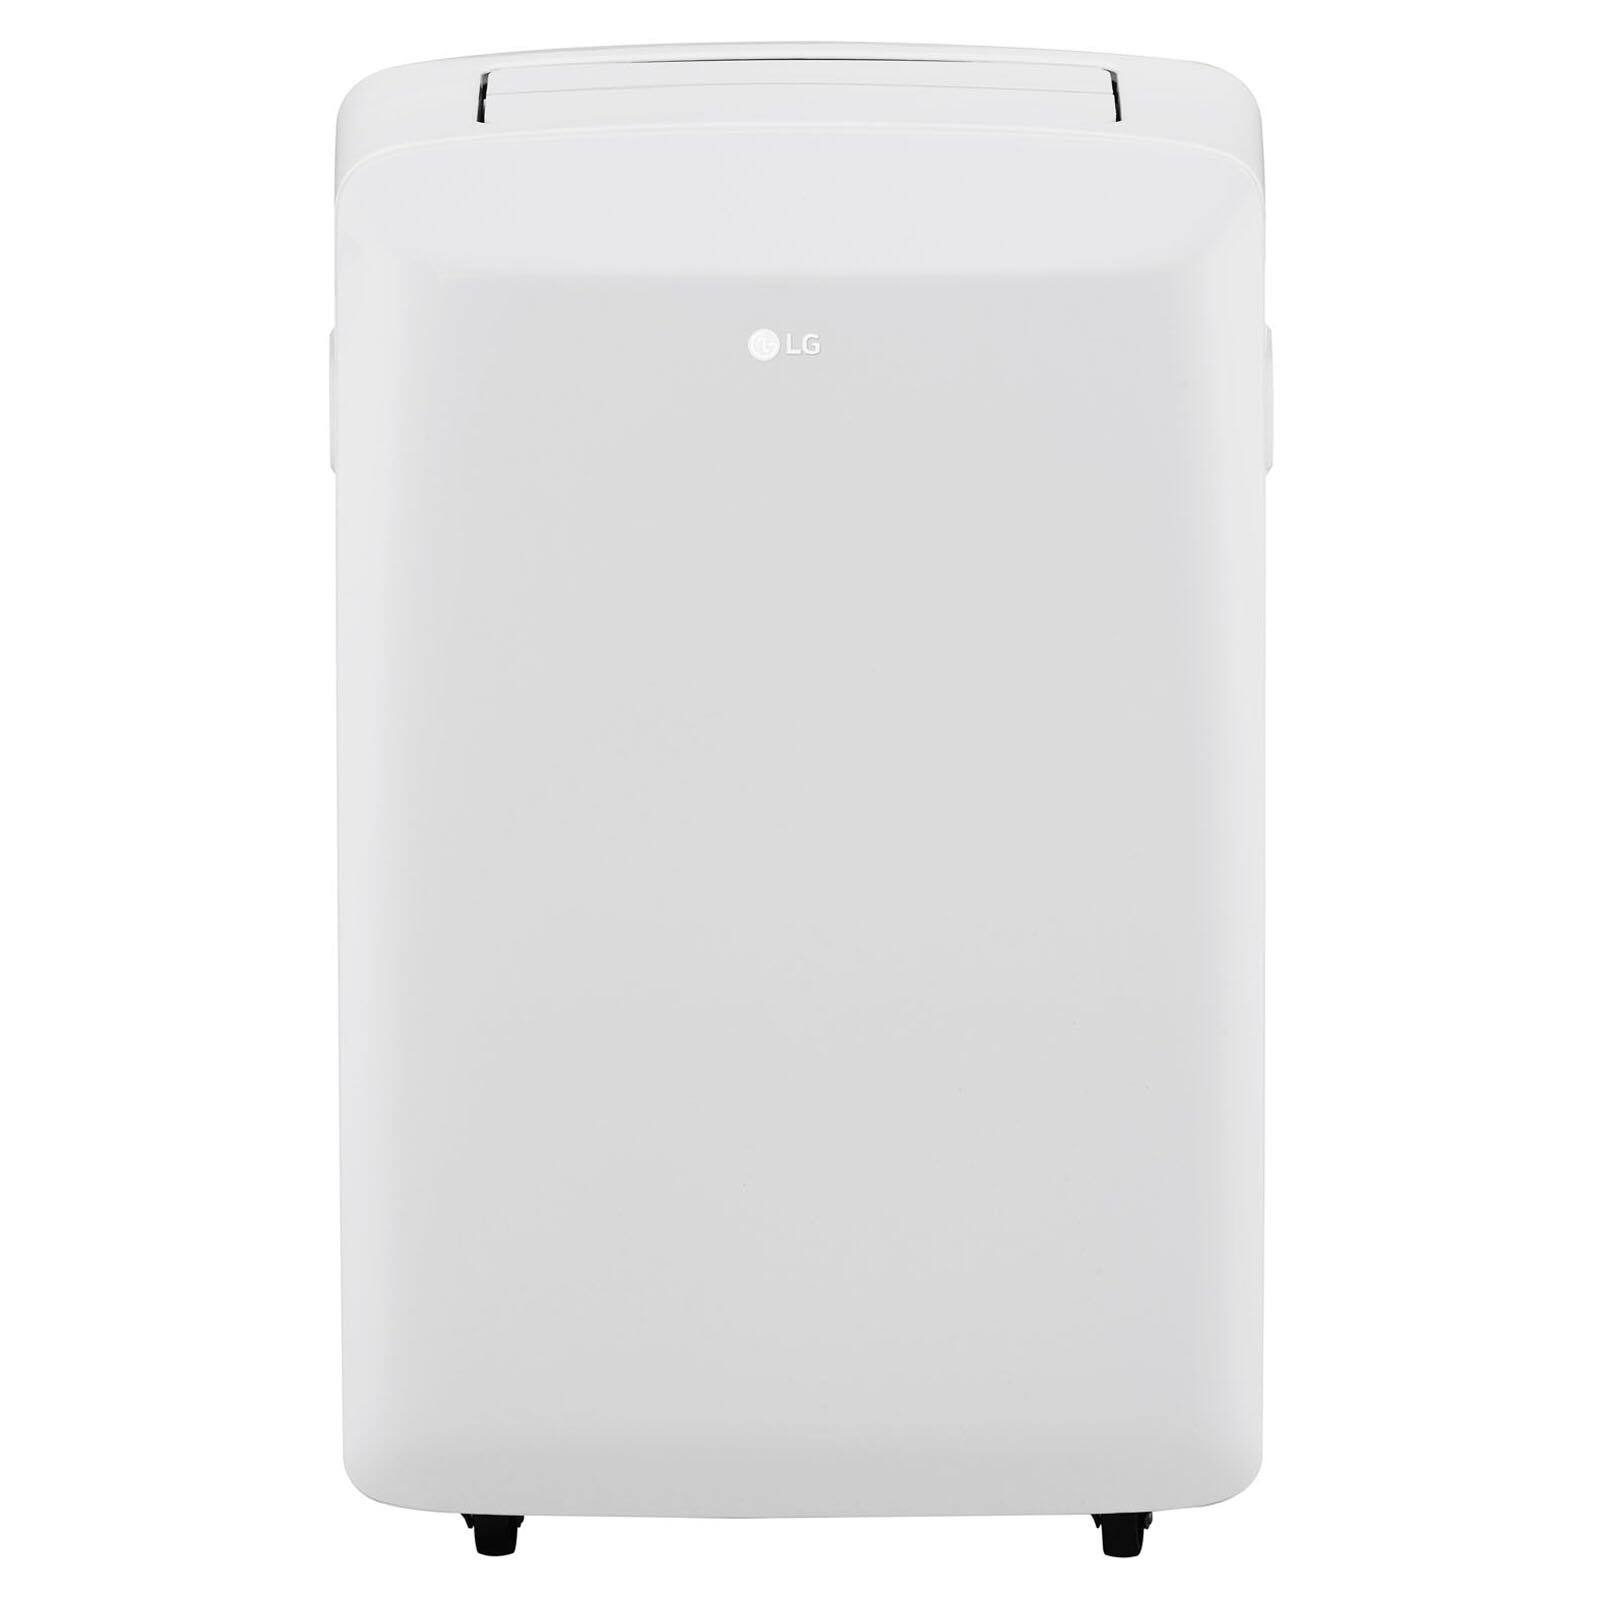 LG 115V Portable Air Conditioner with Remote Control in White for Rooms up to 200 Sq. Ft. - image 1 of 7